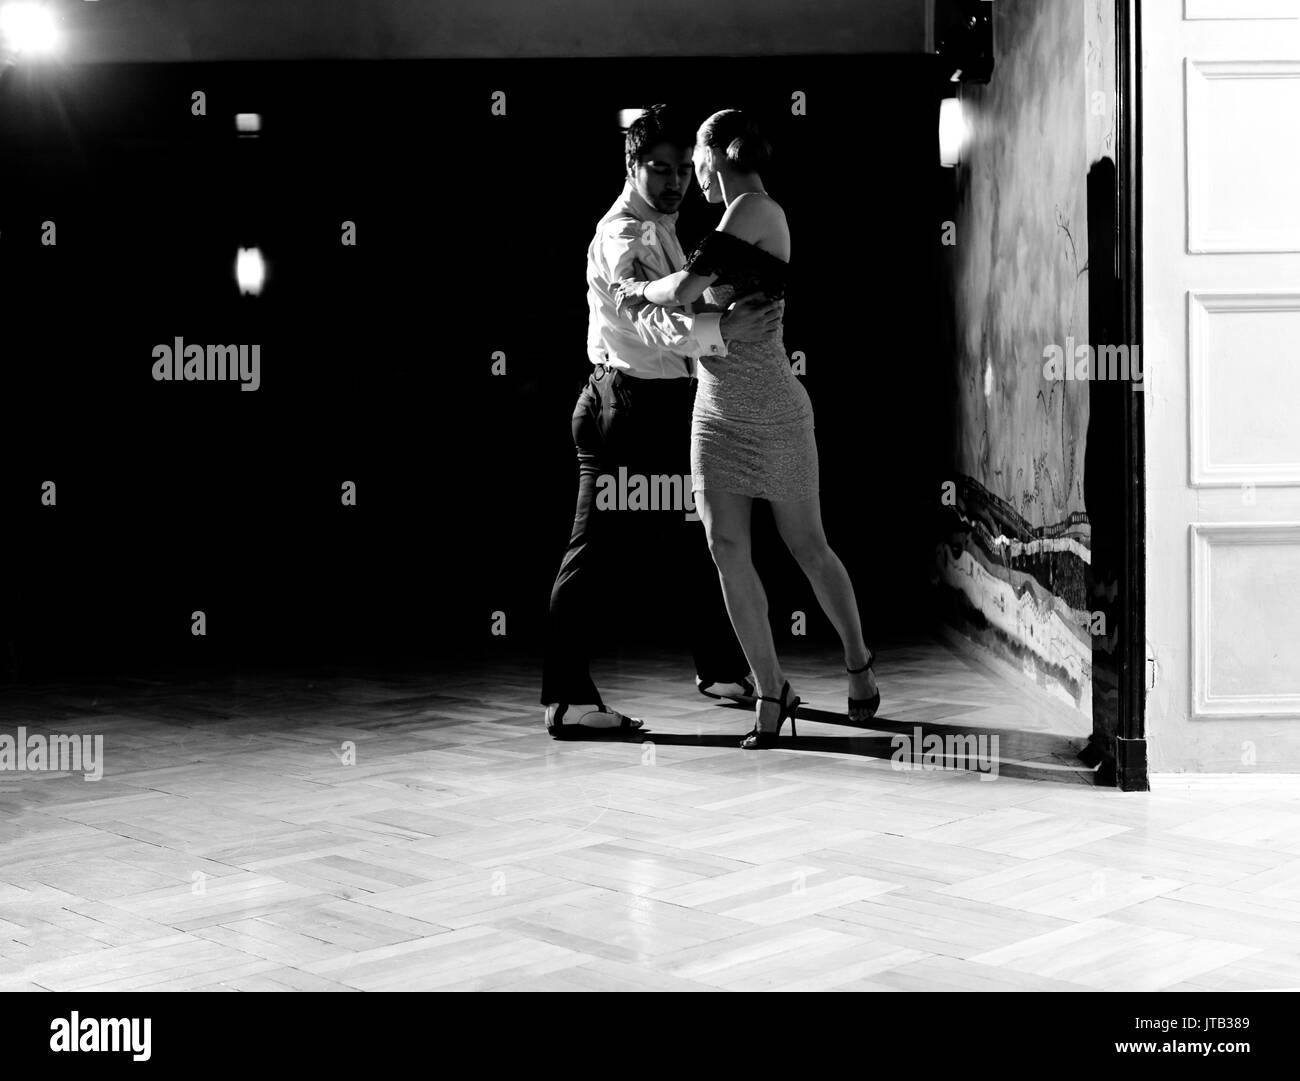 Beautiful dancers performing an argentinian tango dance. Black and white image for more effect. Stock Photo